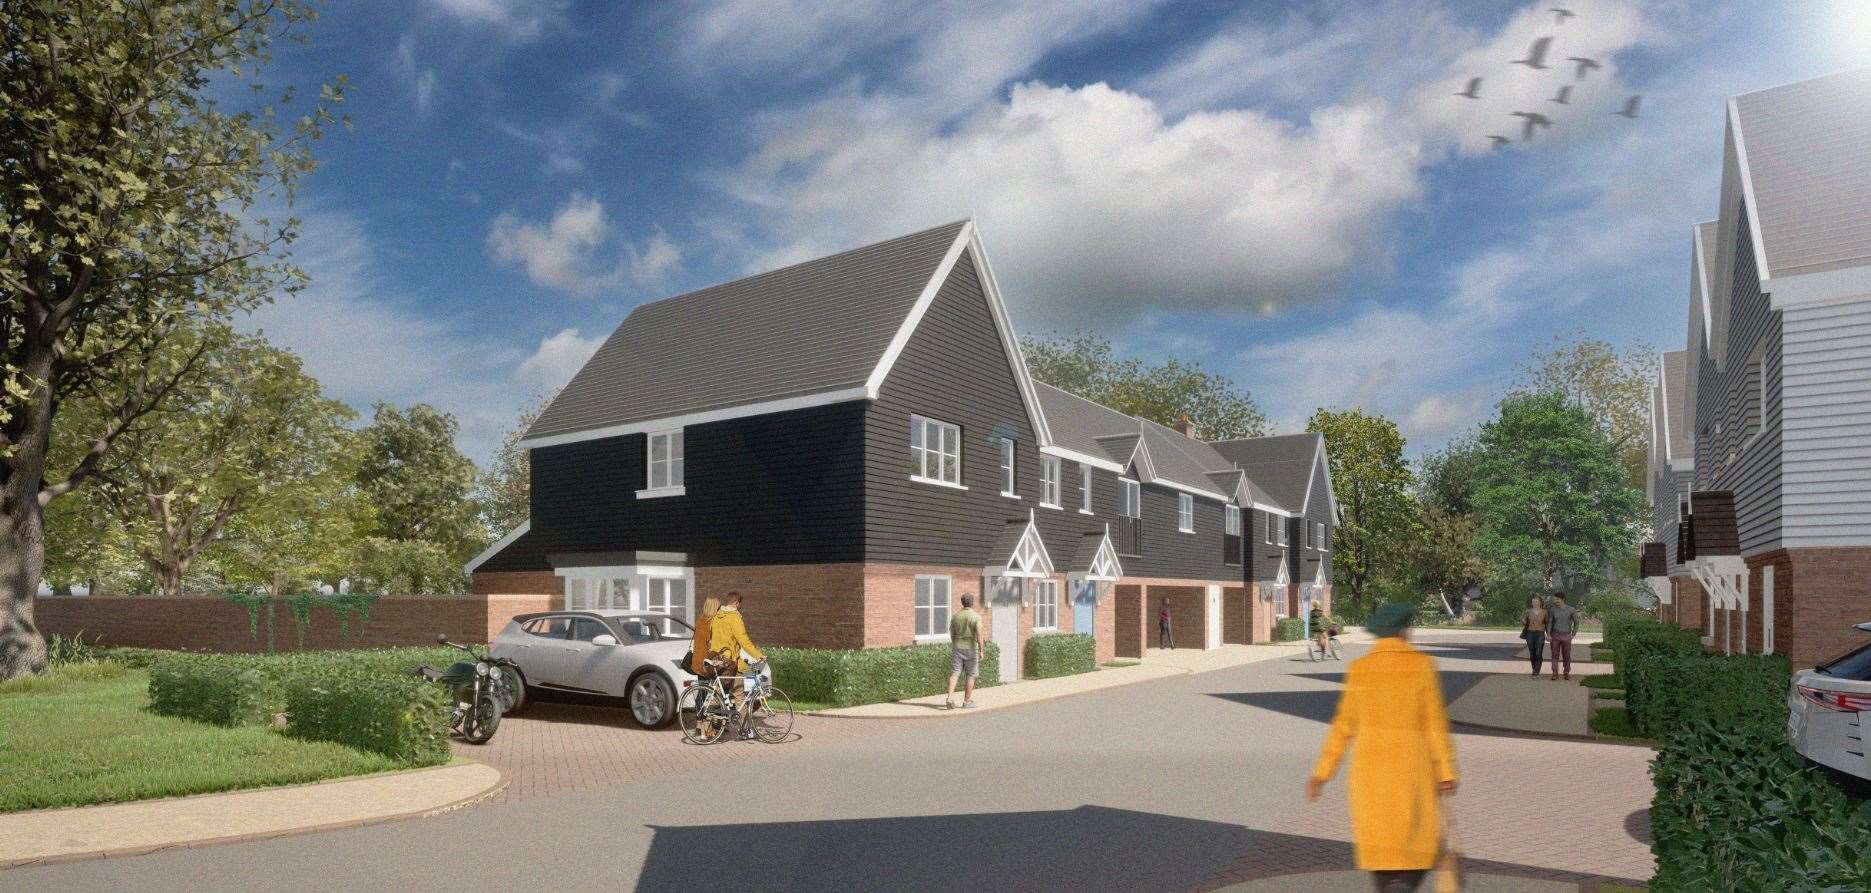 Artist impressions of a proposed development at Fosse Bank independent school in Tonbridge for 76 homes